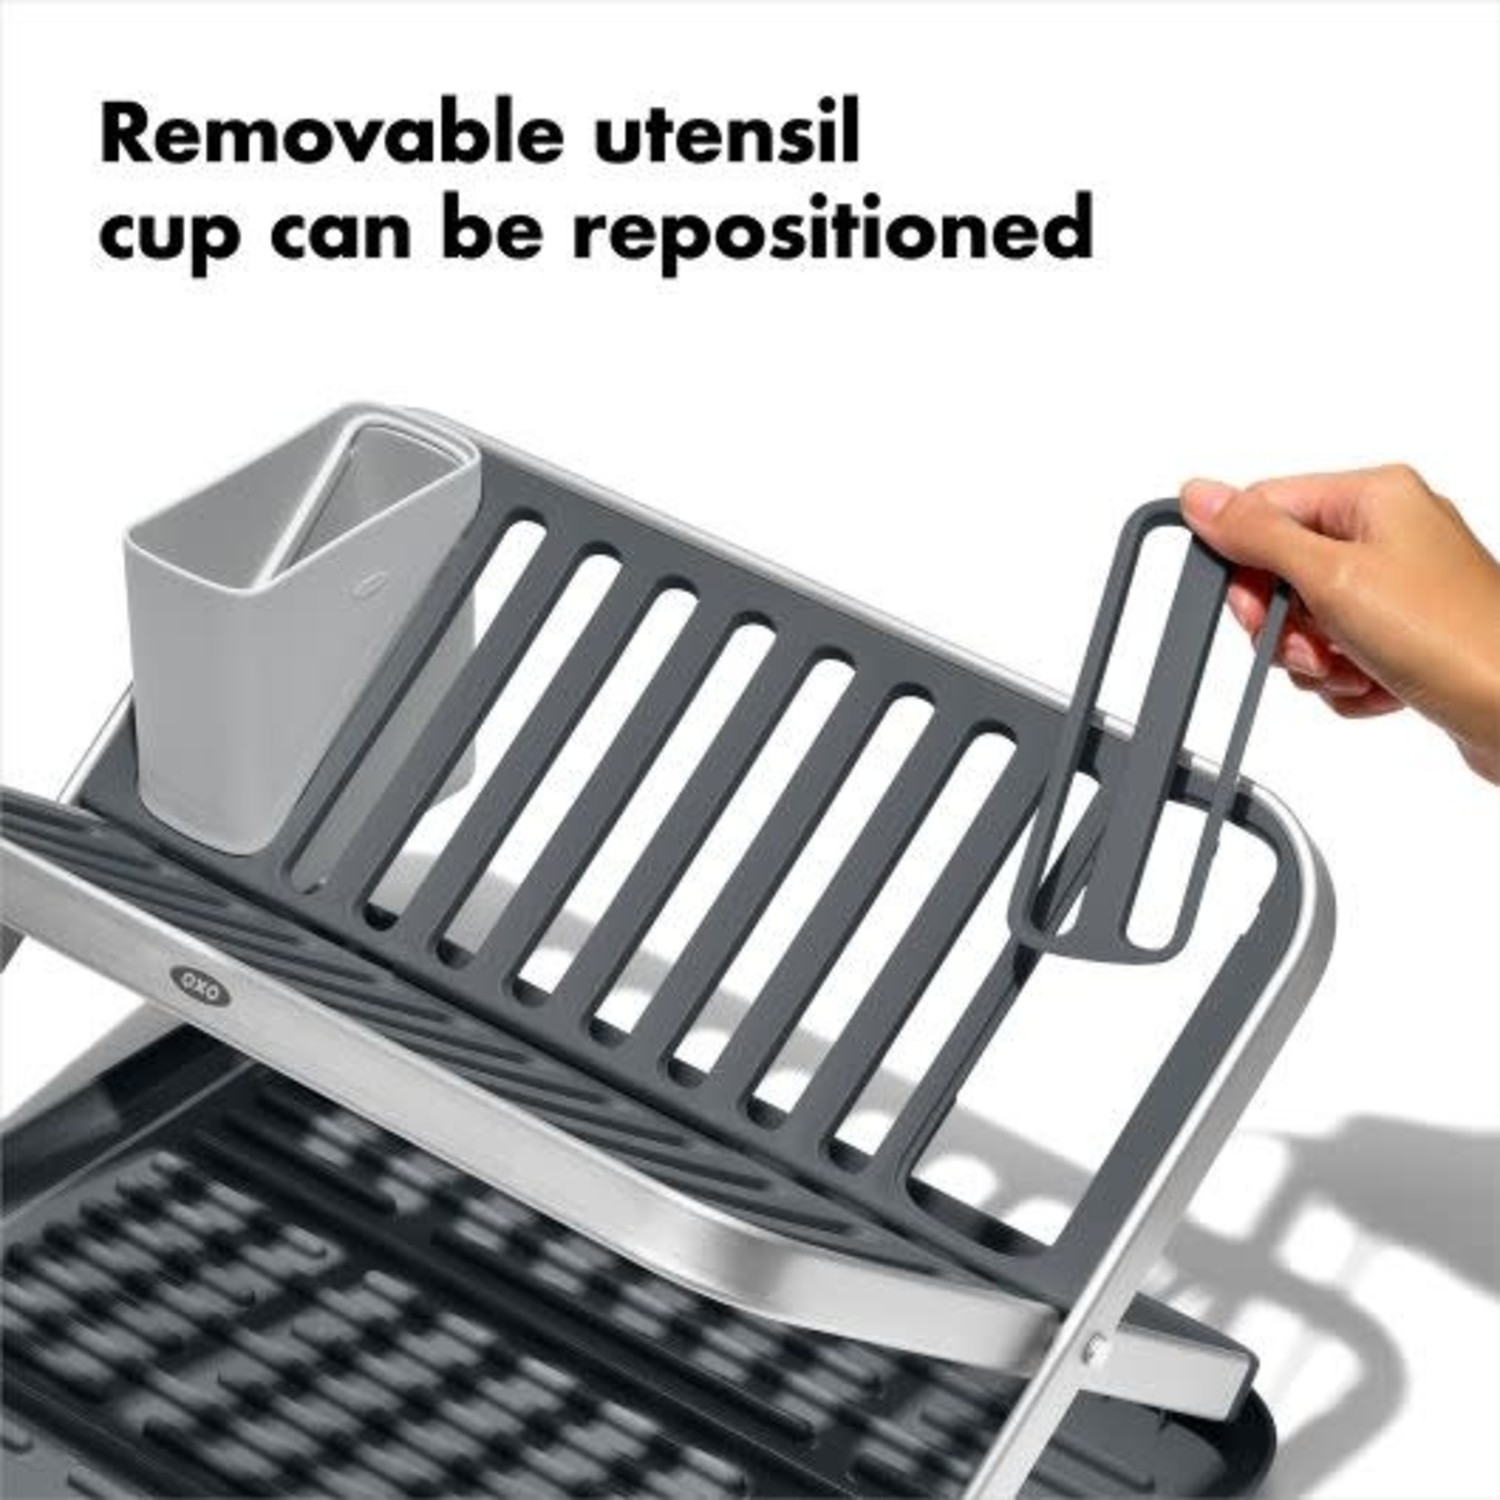 OXO Good Grips Over-The-Sink Aluminum Dish Rack